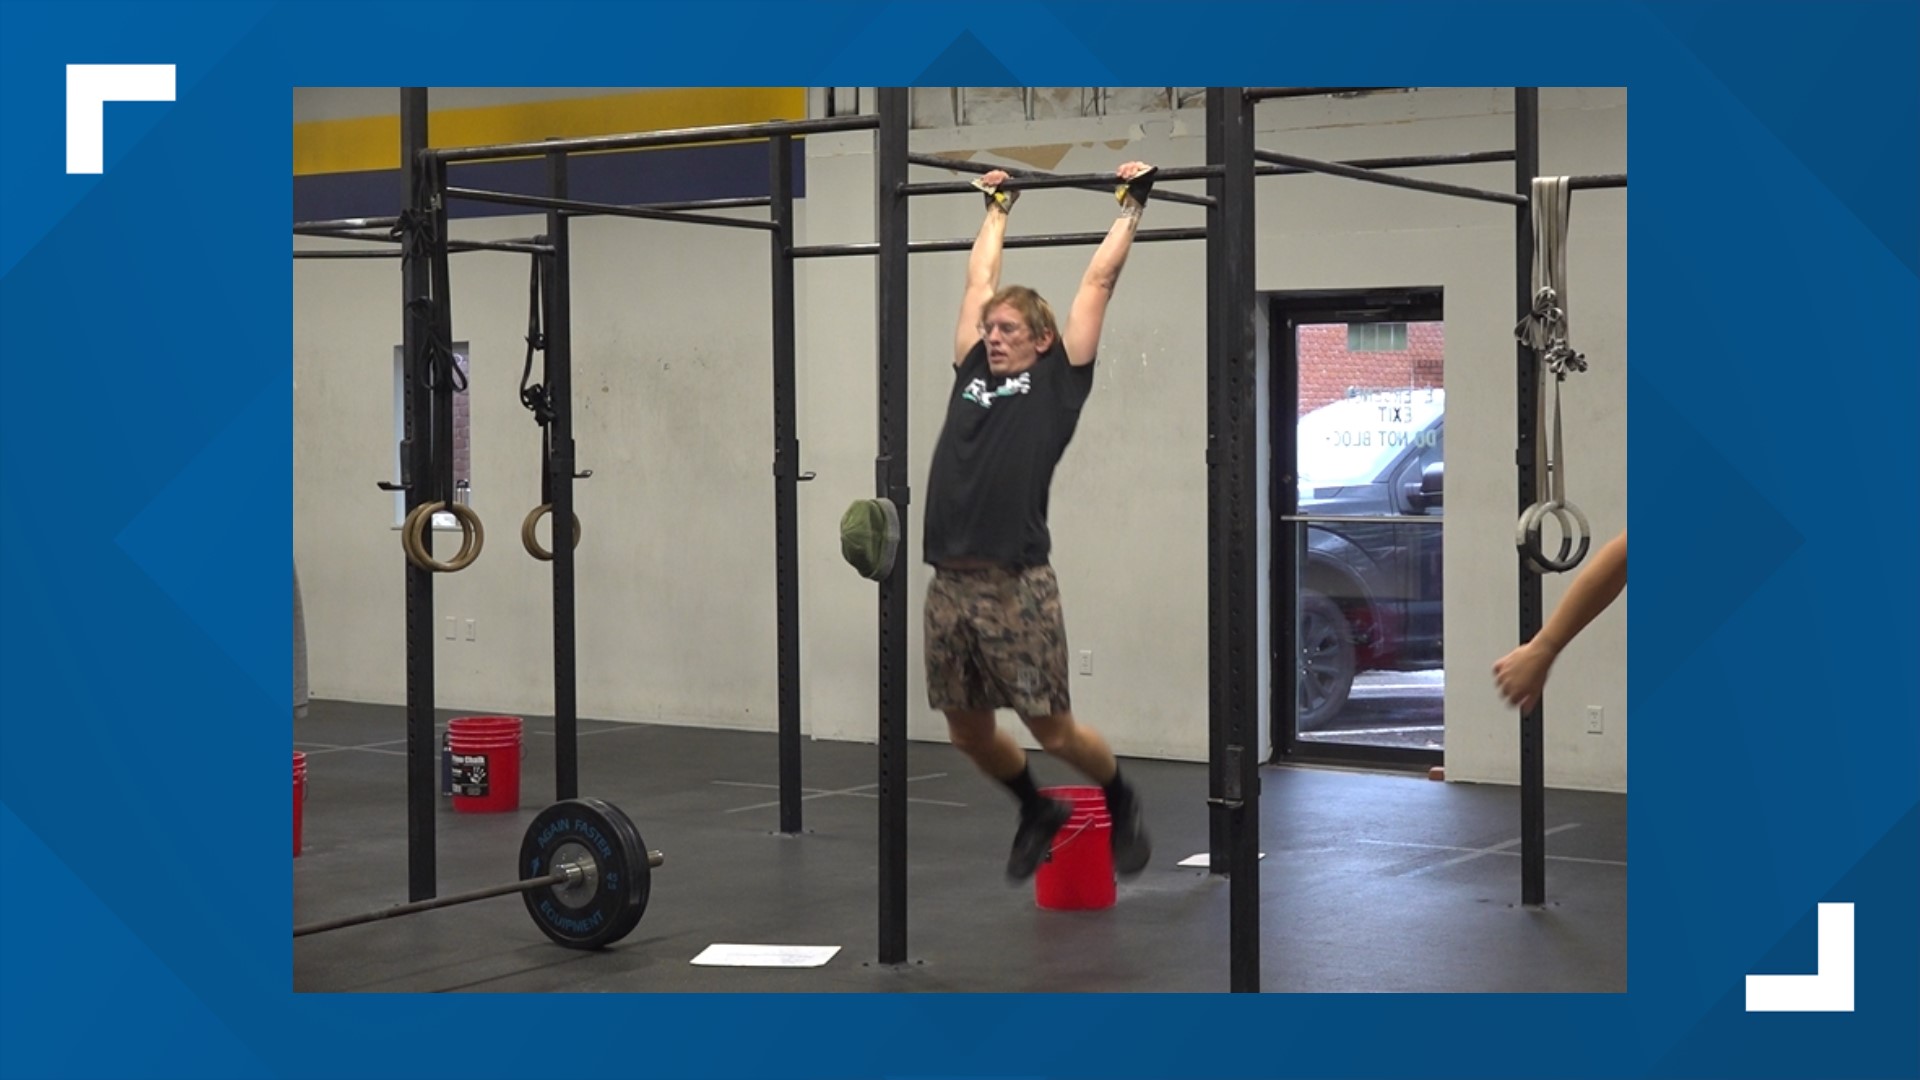 Did you know that CrossFit exercises can be scaled down to fit all fitness levels and workout routines? Learn more about it and Crossfit CDI here!